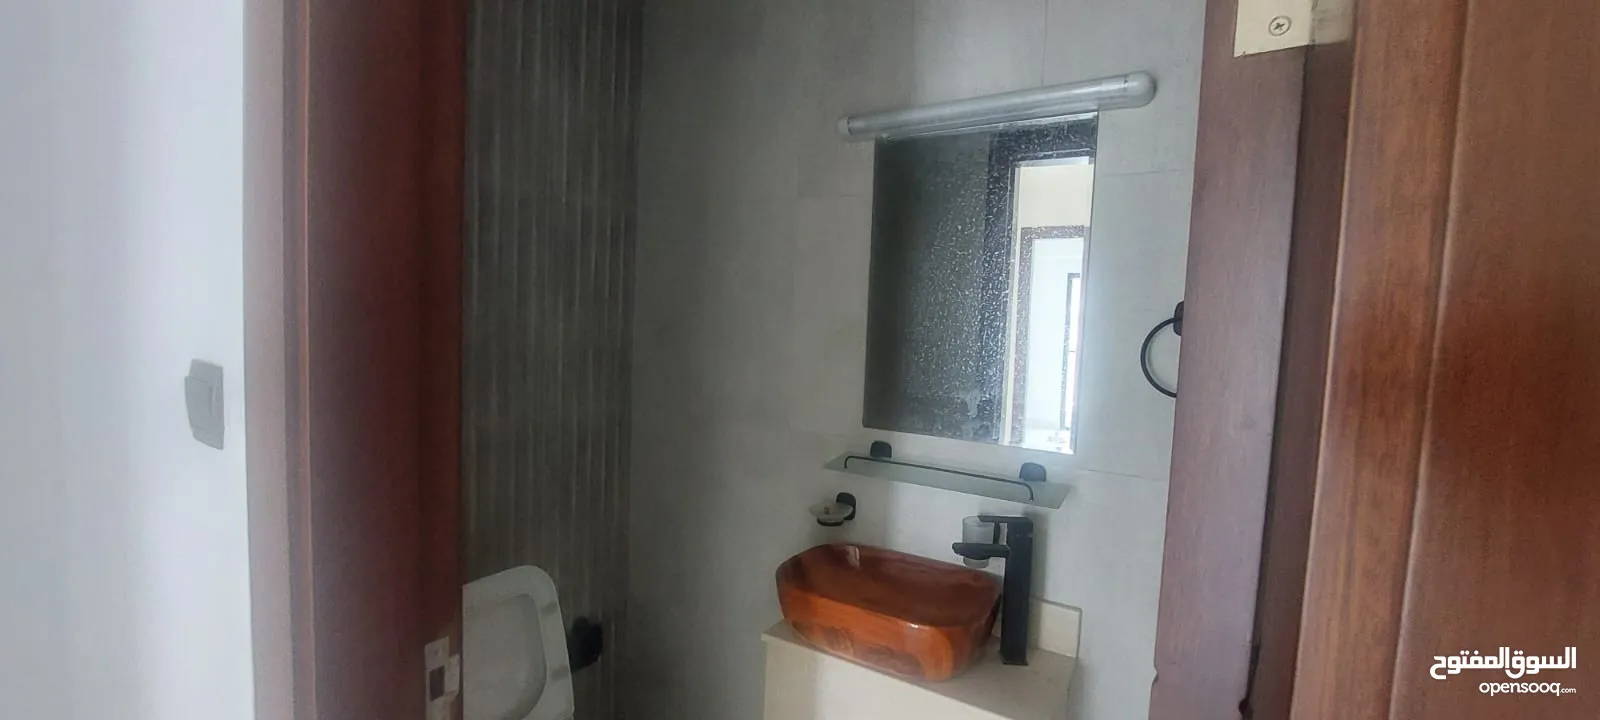 Tow bed room for yearly rent in ajman al zora